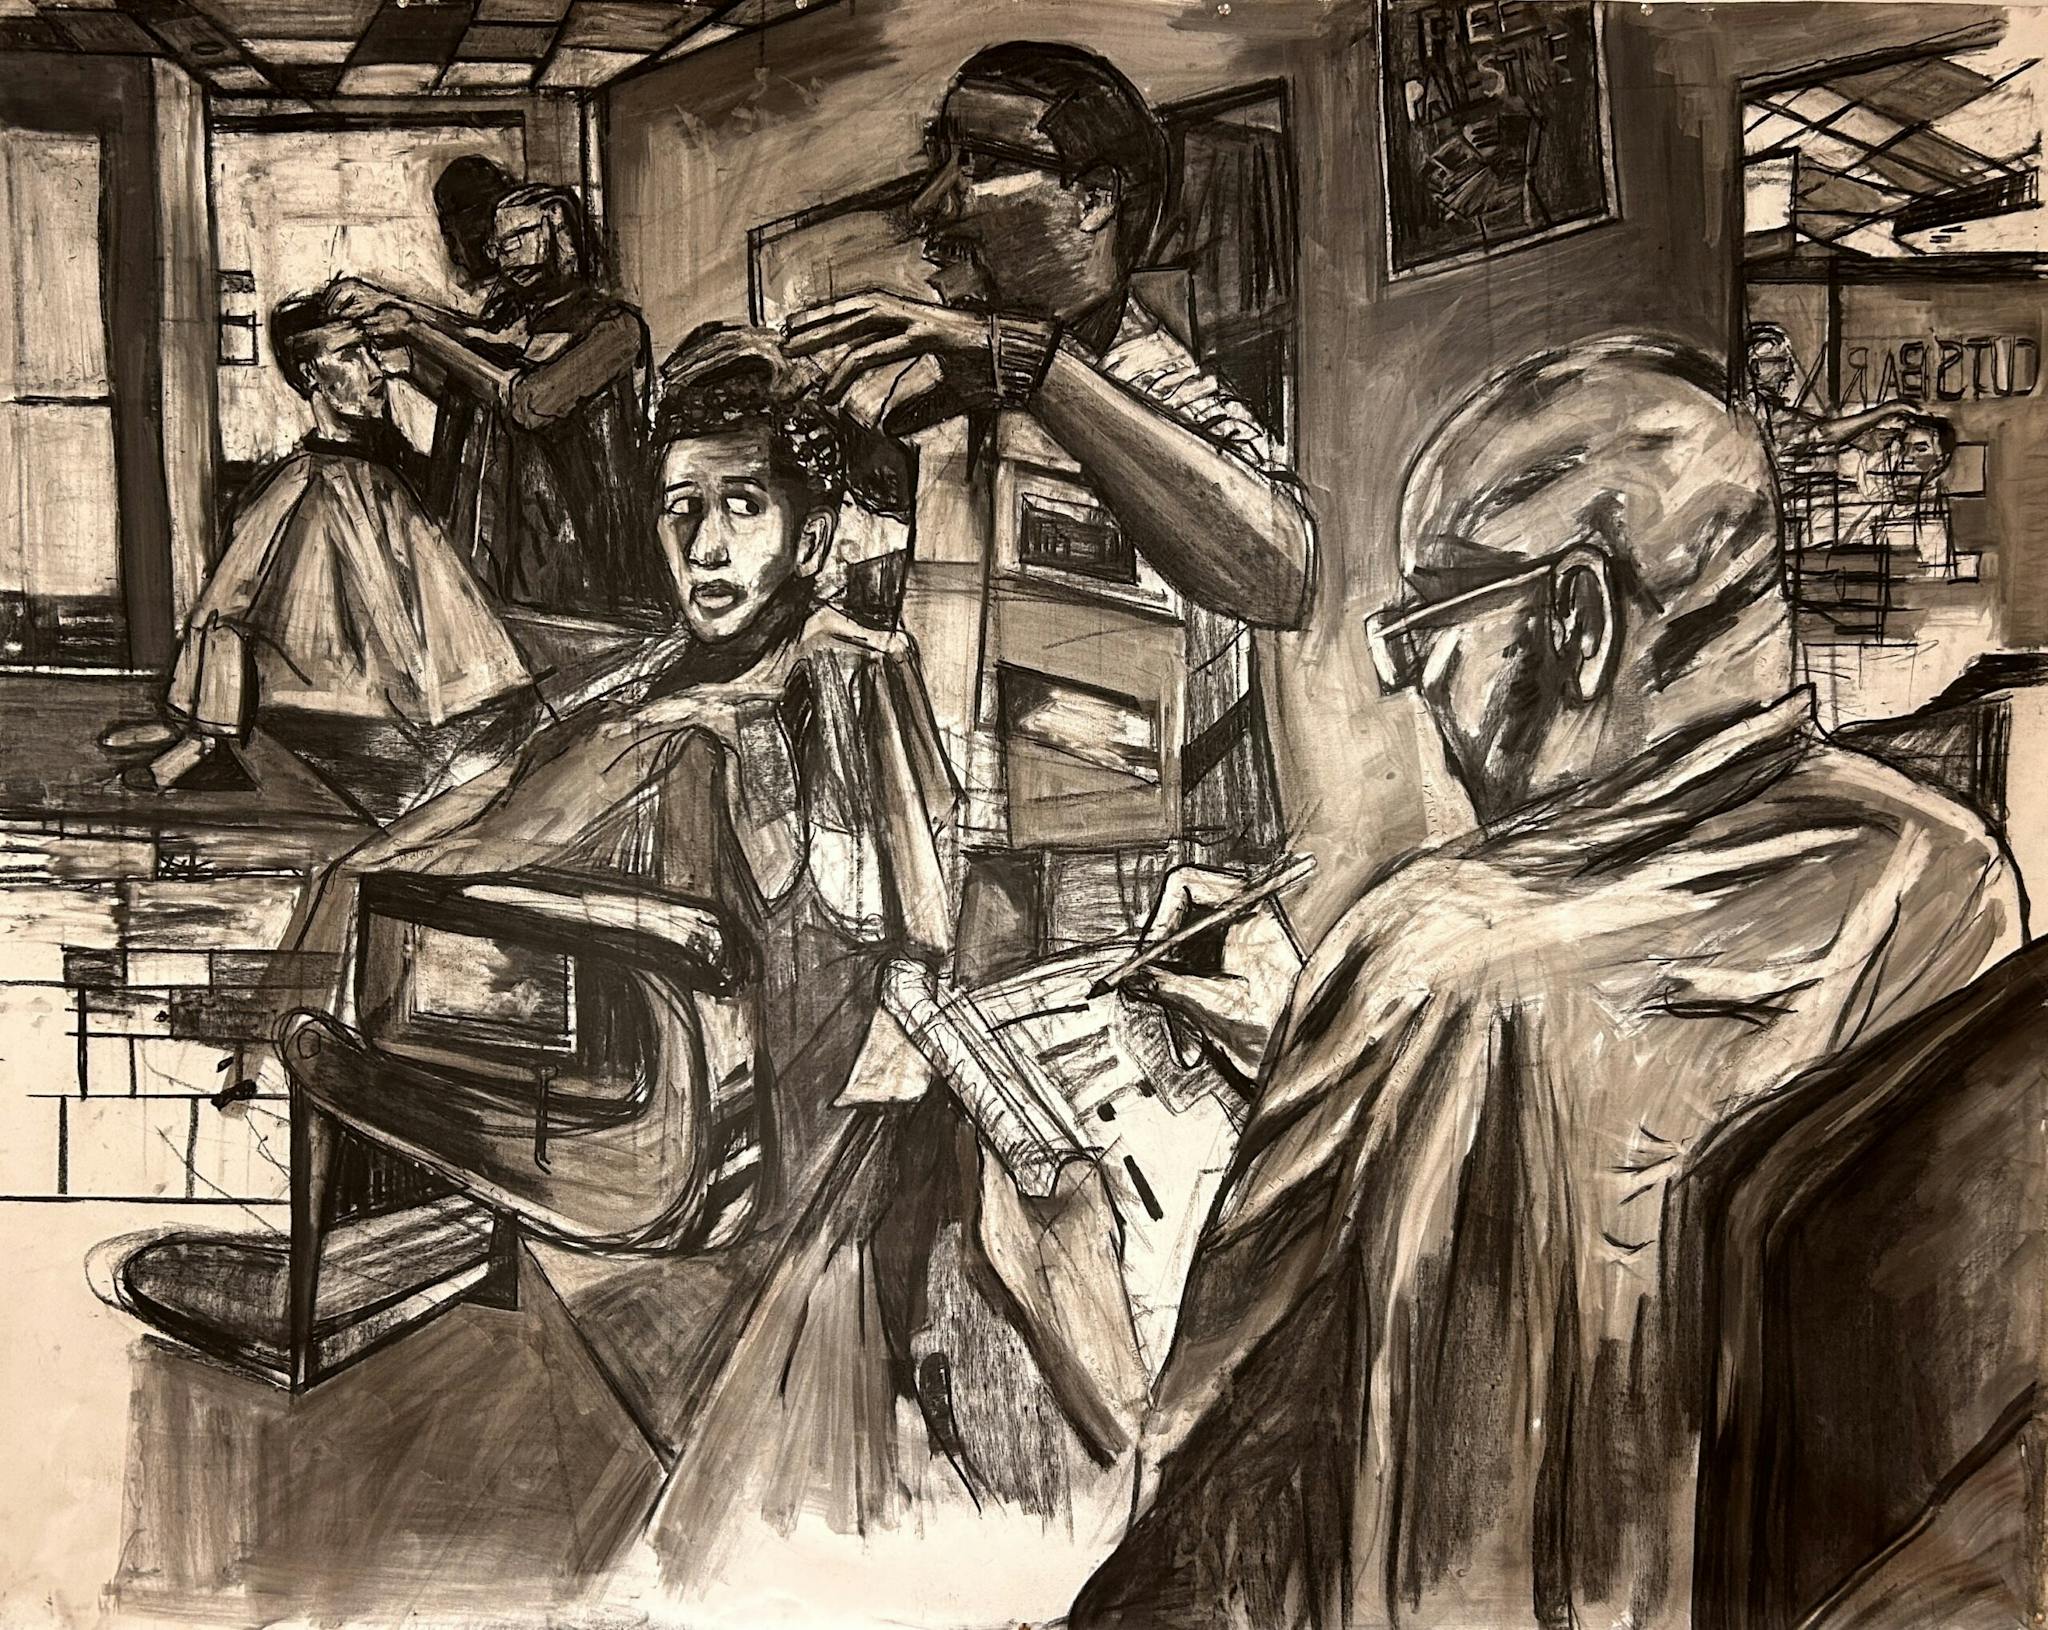 Charcoal drawing of a scene inside a barber's shop. A young man gets his hair cut while an older gentleman waits his turn.